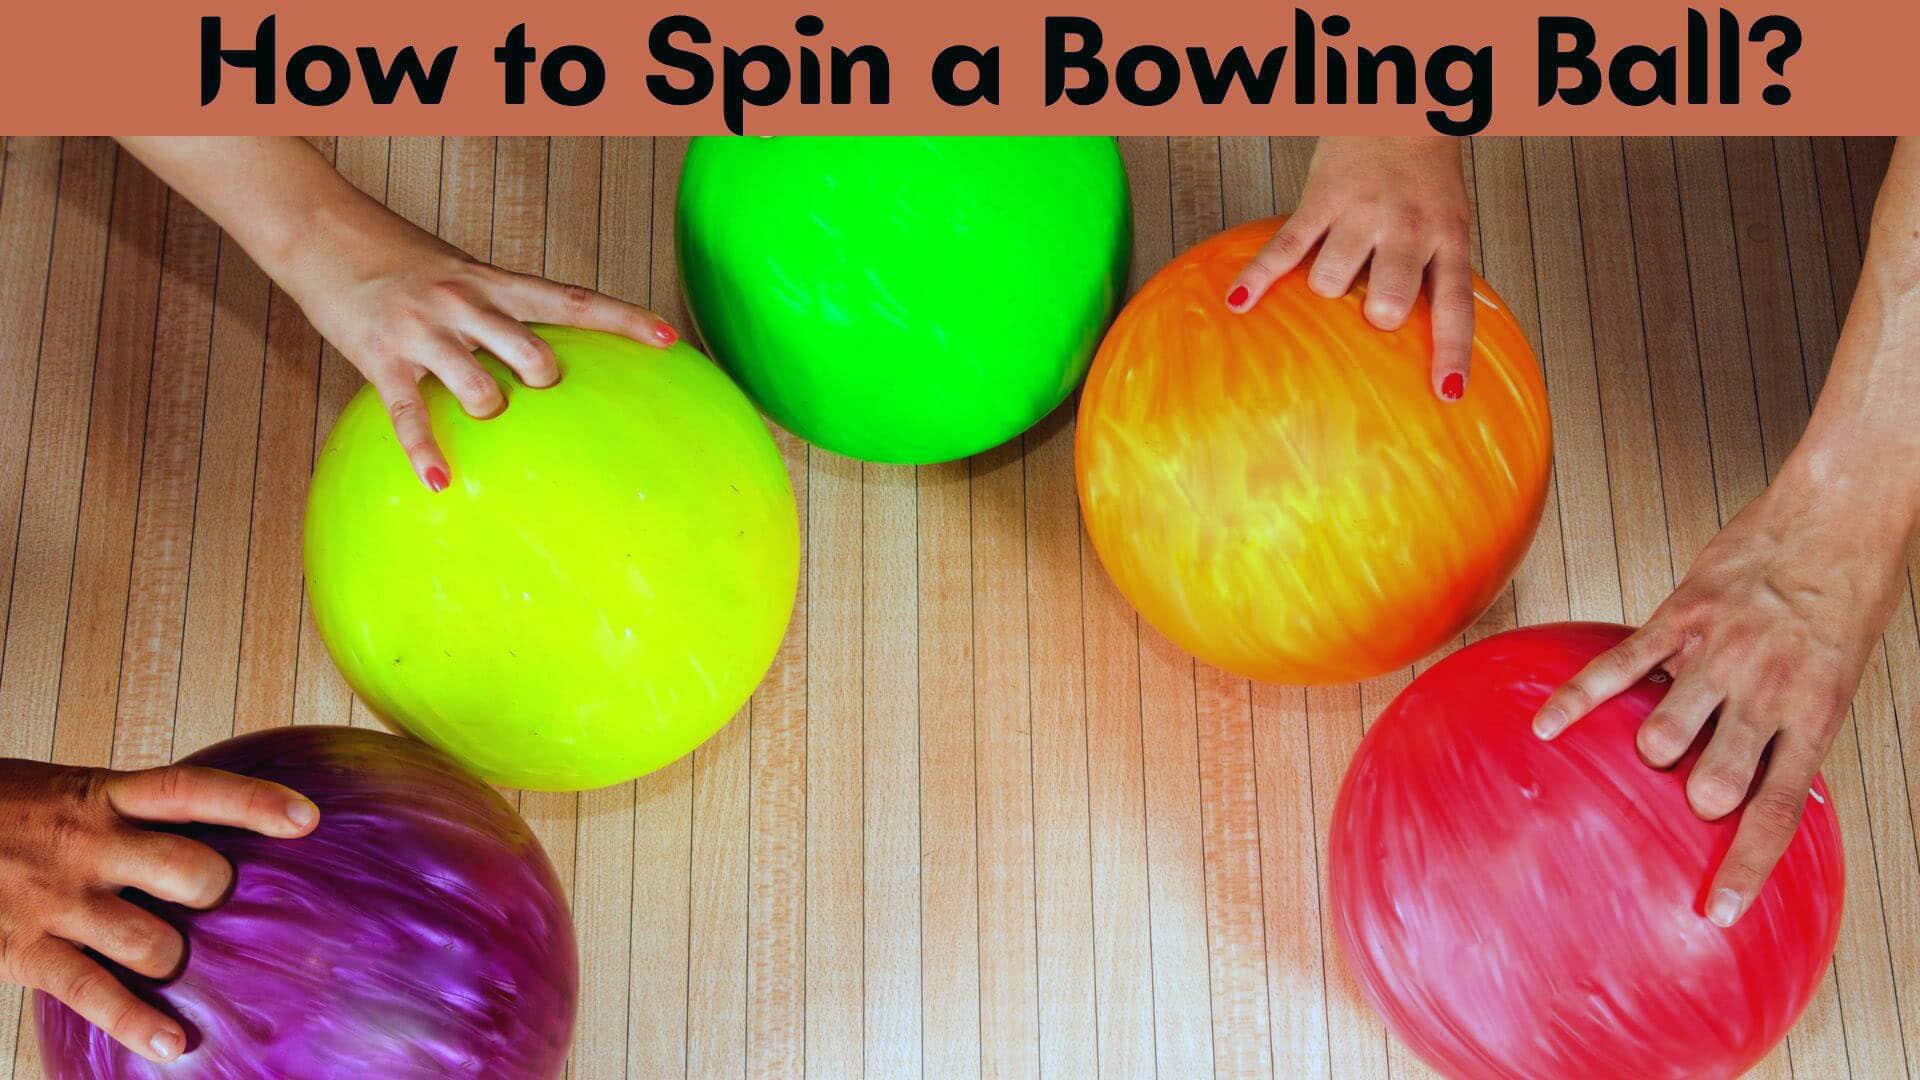 How to Spin a Bowling Ball?